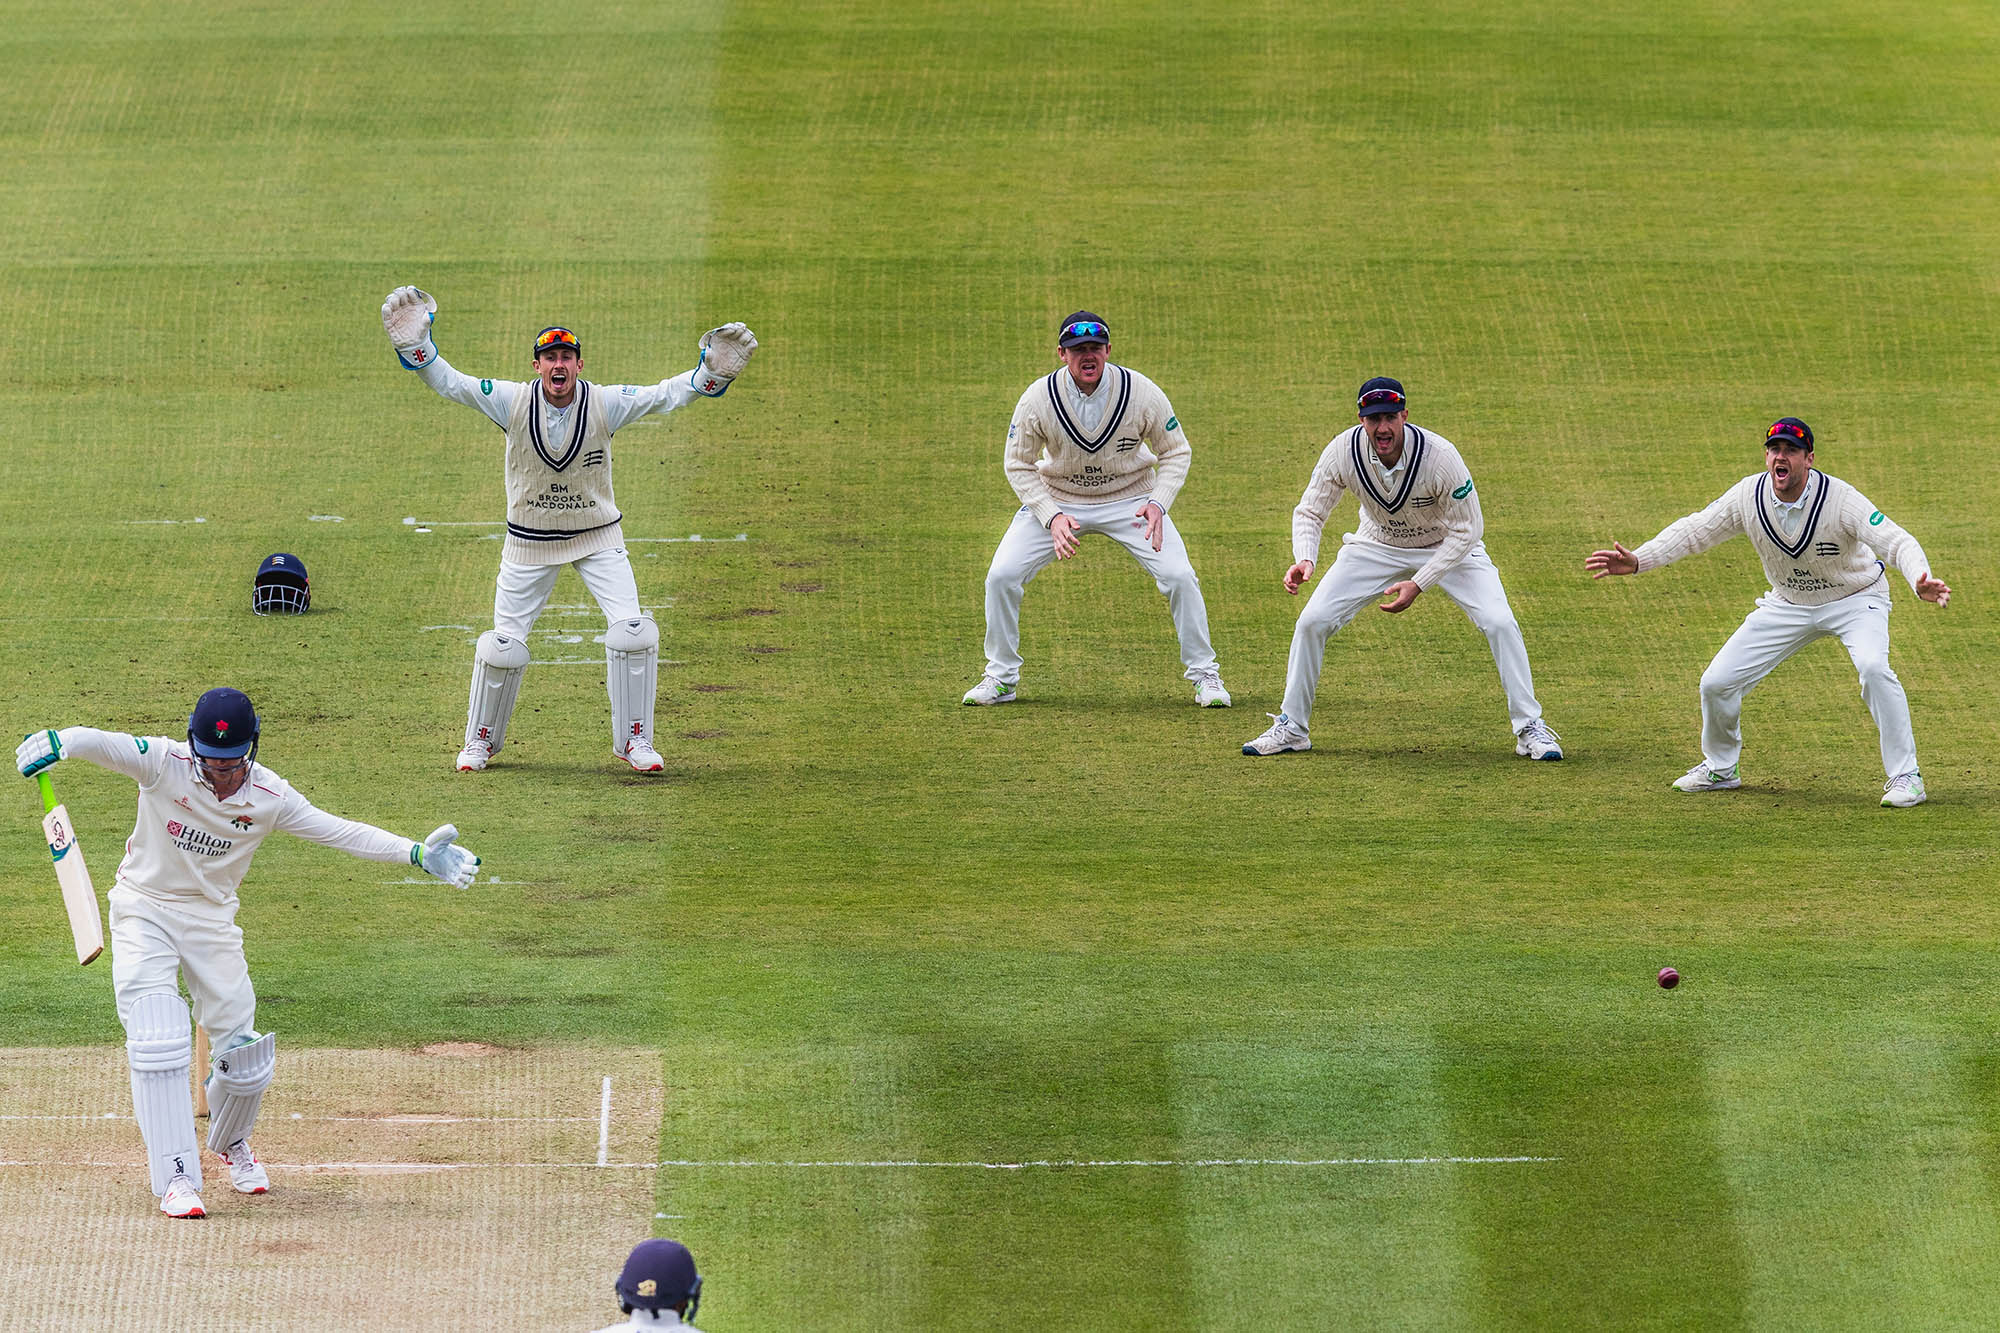 A cricket player swings and misses while four cricket players behind him react.